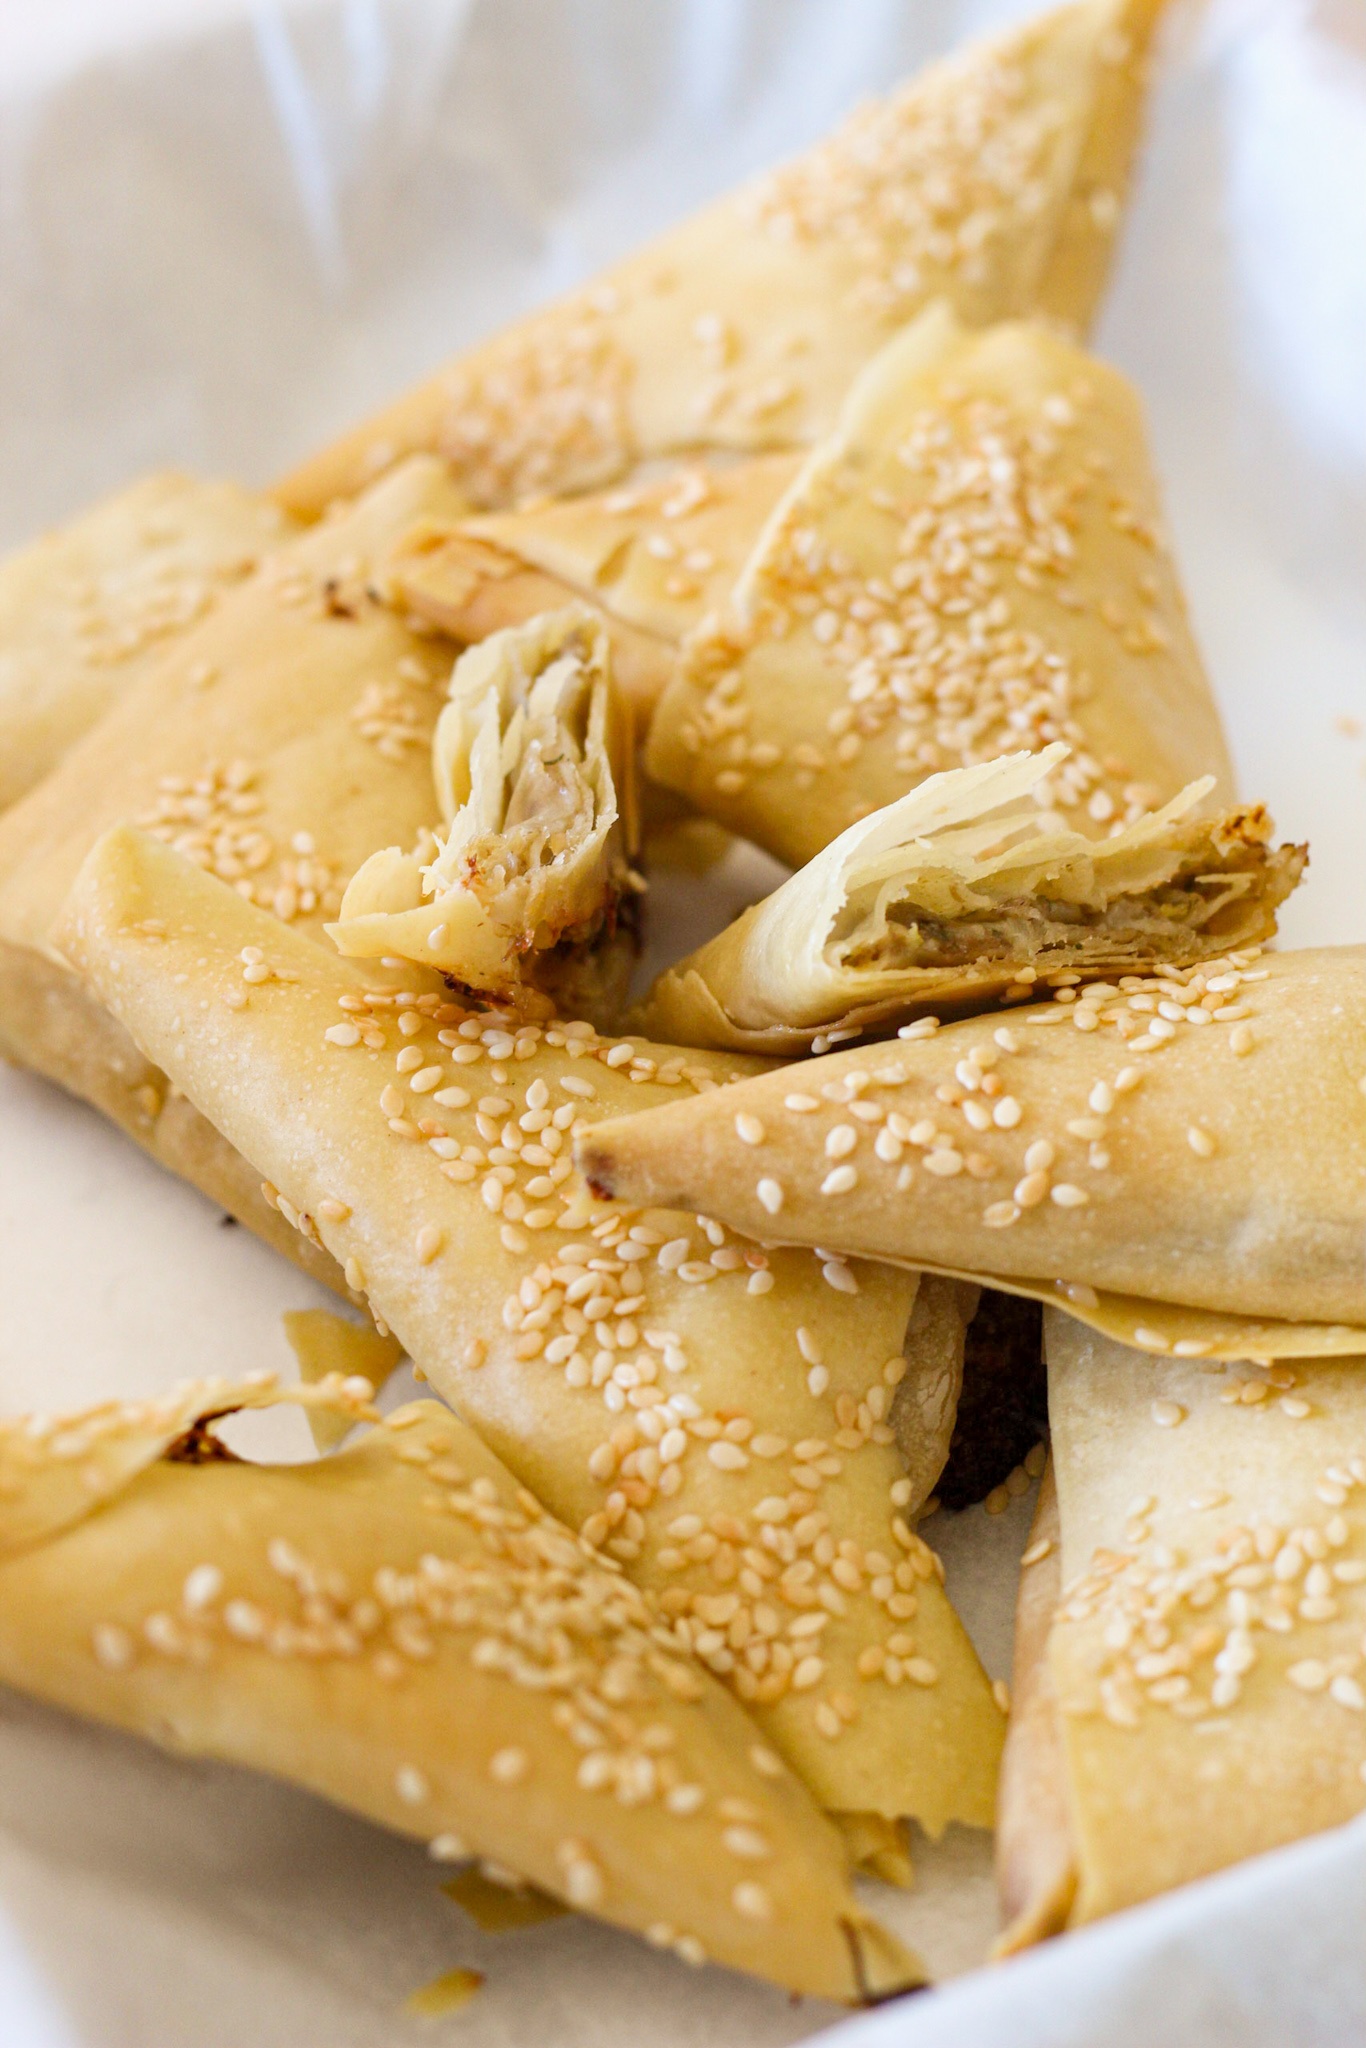 Triagled pastry puffs topped with sesame seeds and filled with mushrooms and cheeses